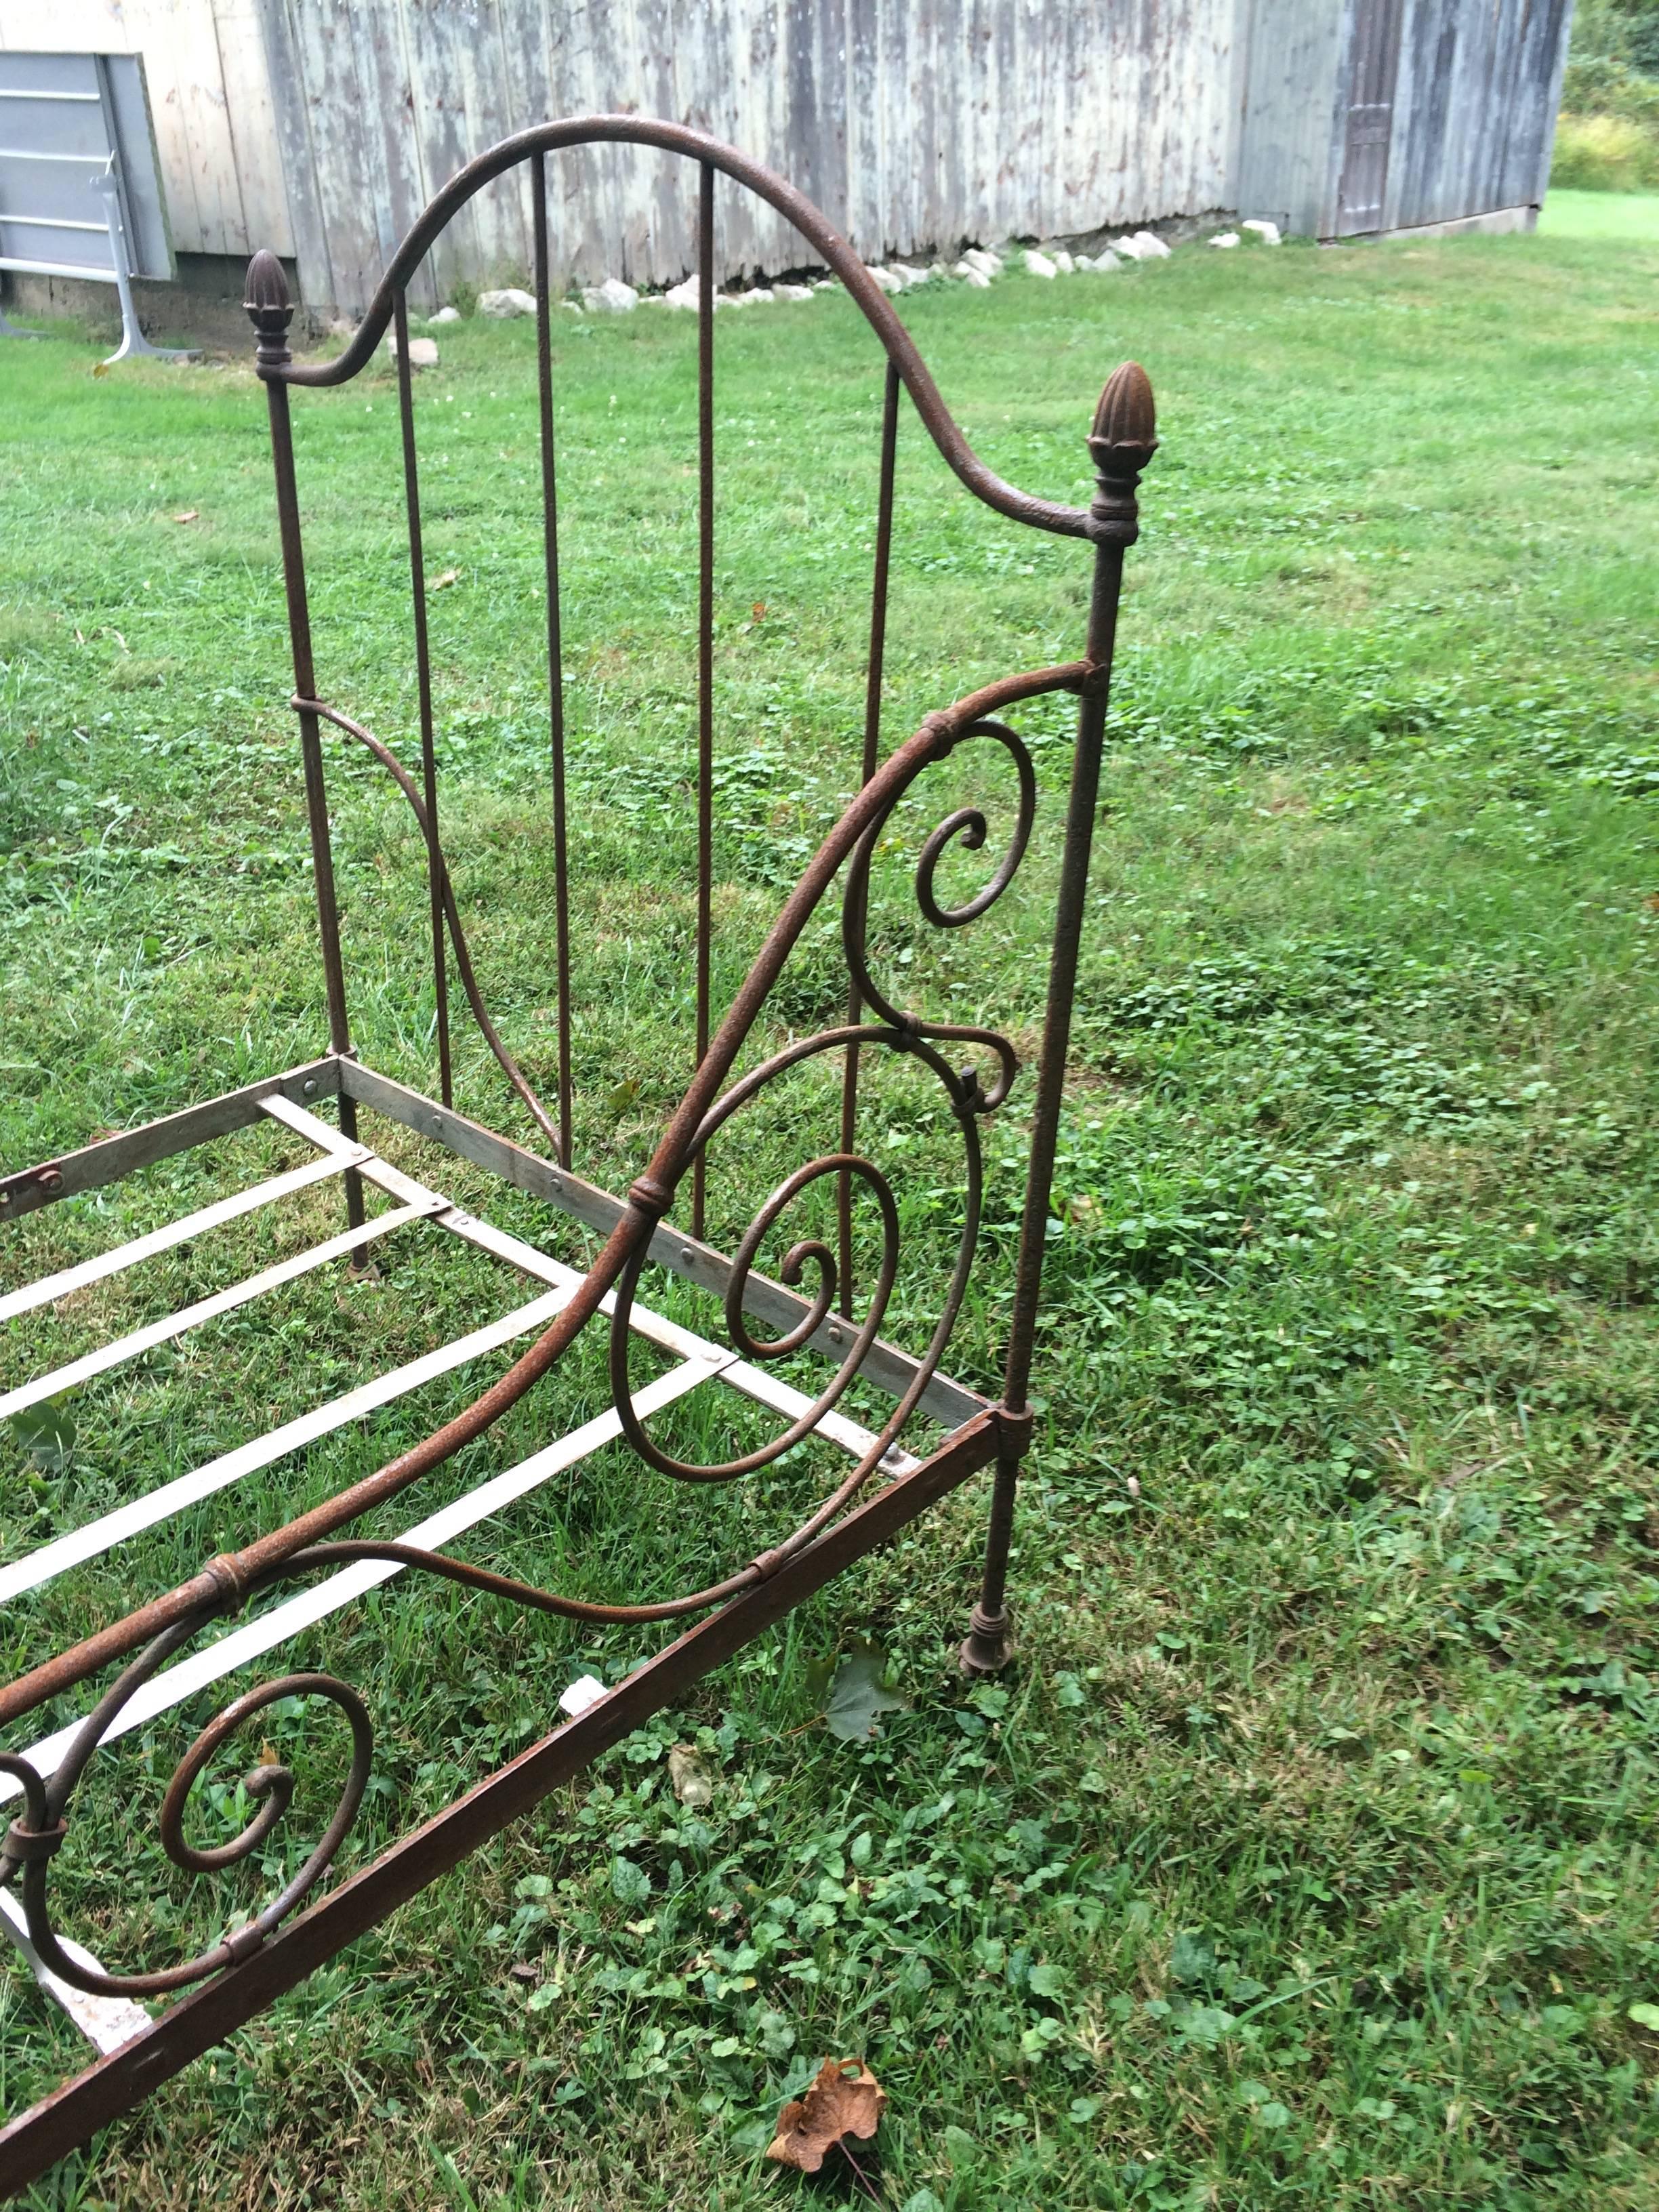 Classic French iron daybed with a natural brown patina, curlicues and acorn finials, on casters. Ends fold in, Campaign style. No mattress included.